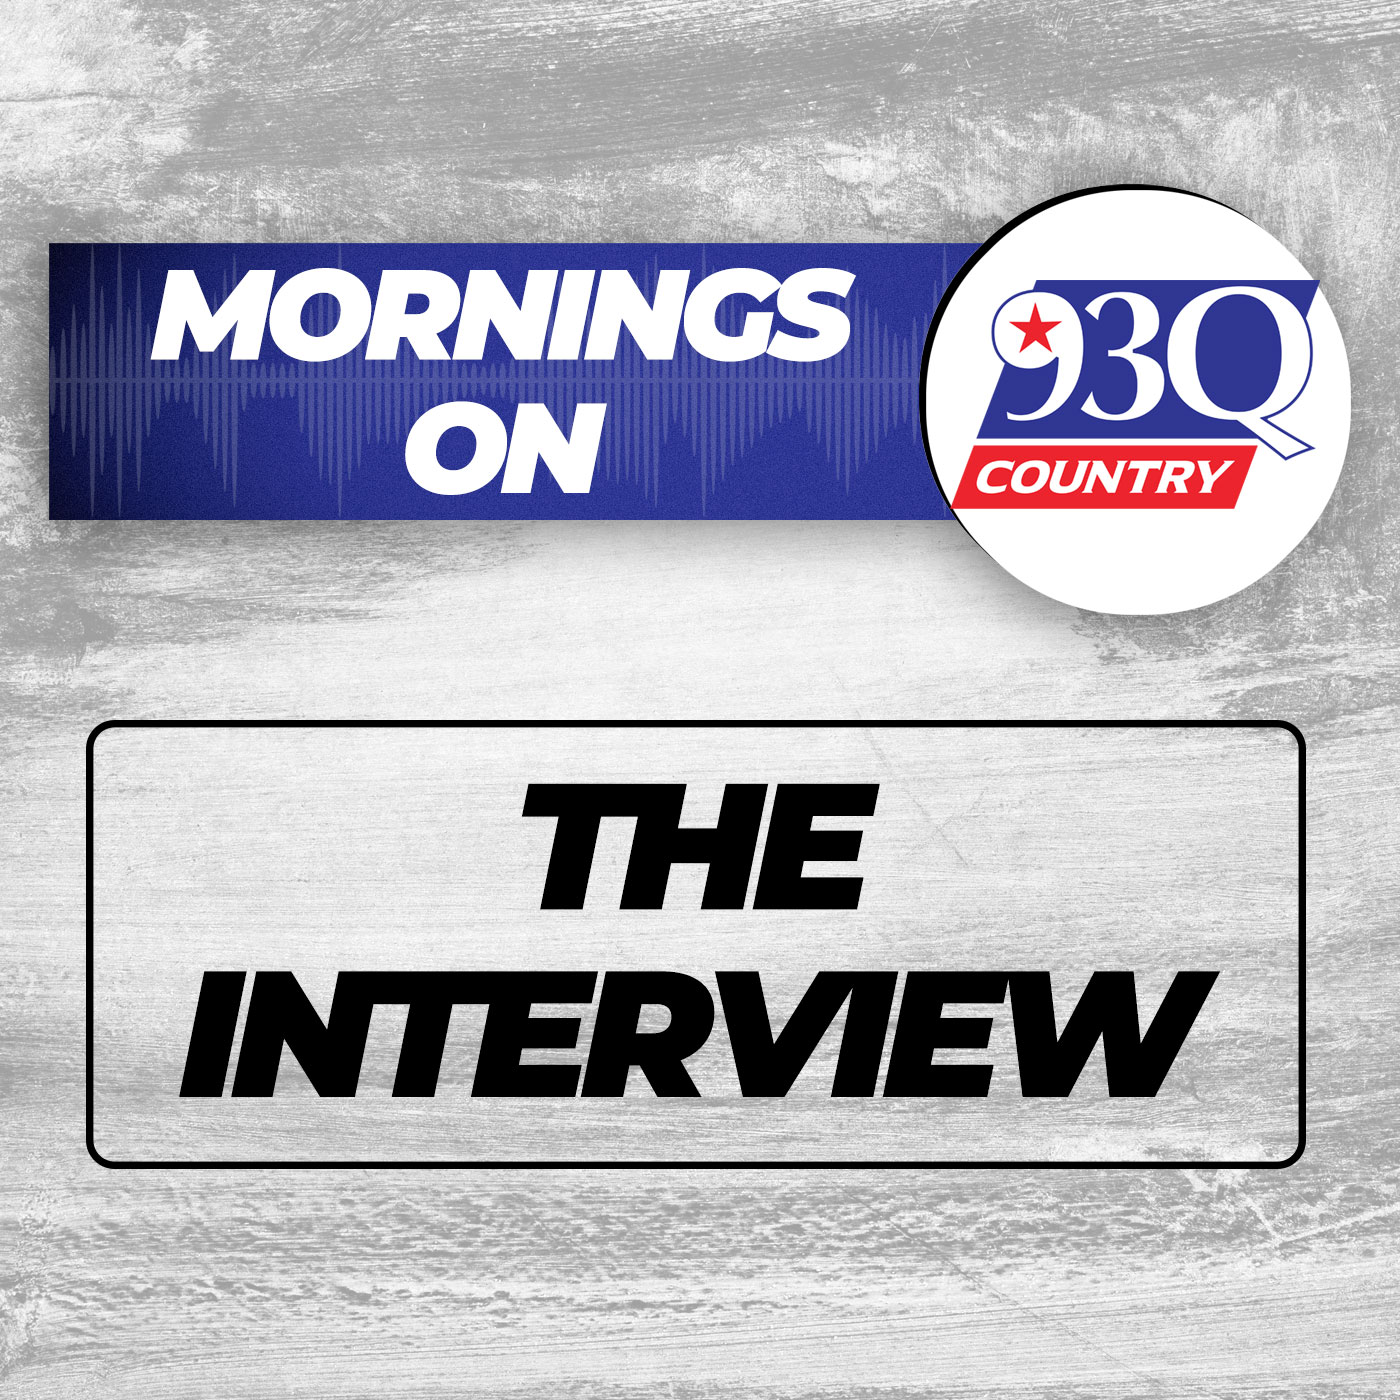 Mornings on 93Q - The Interview